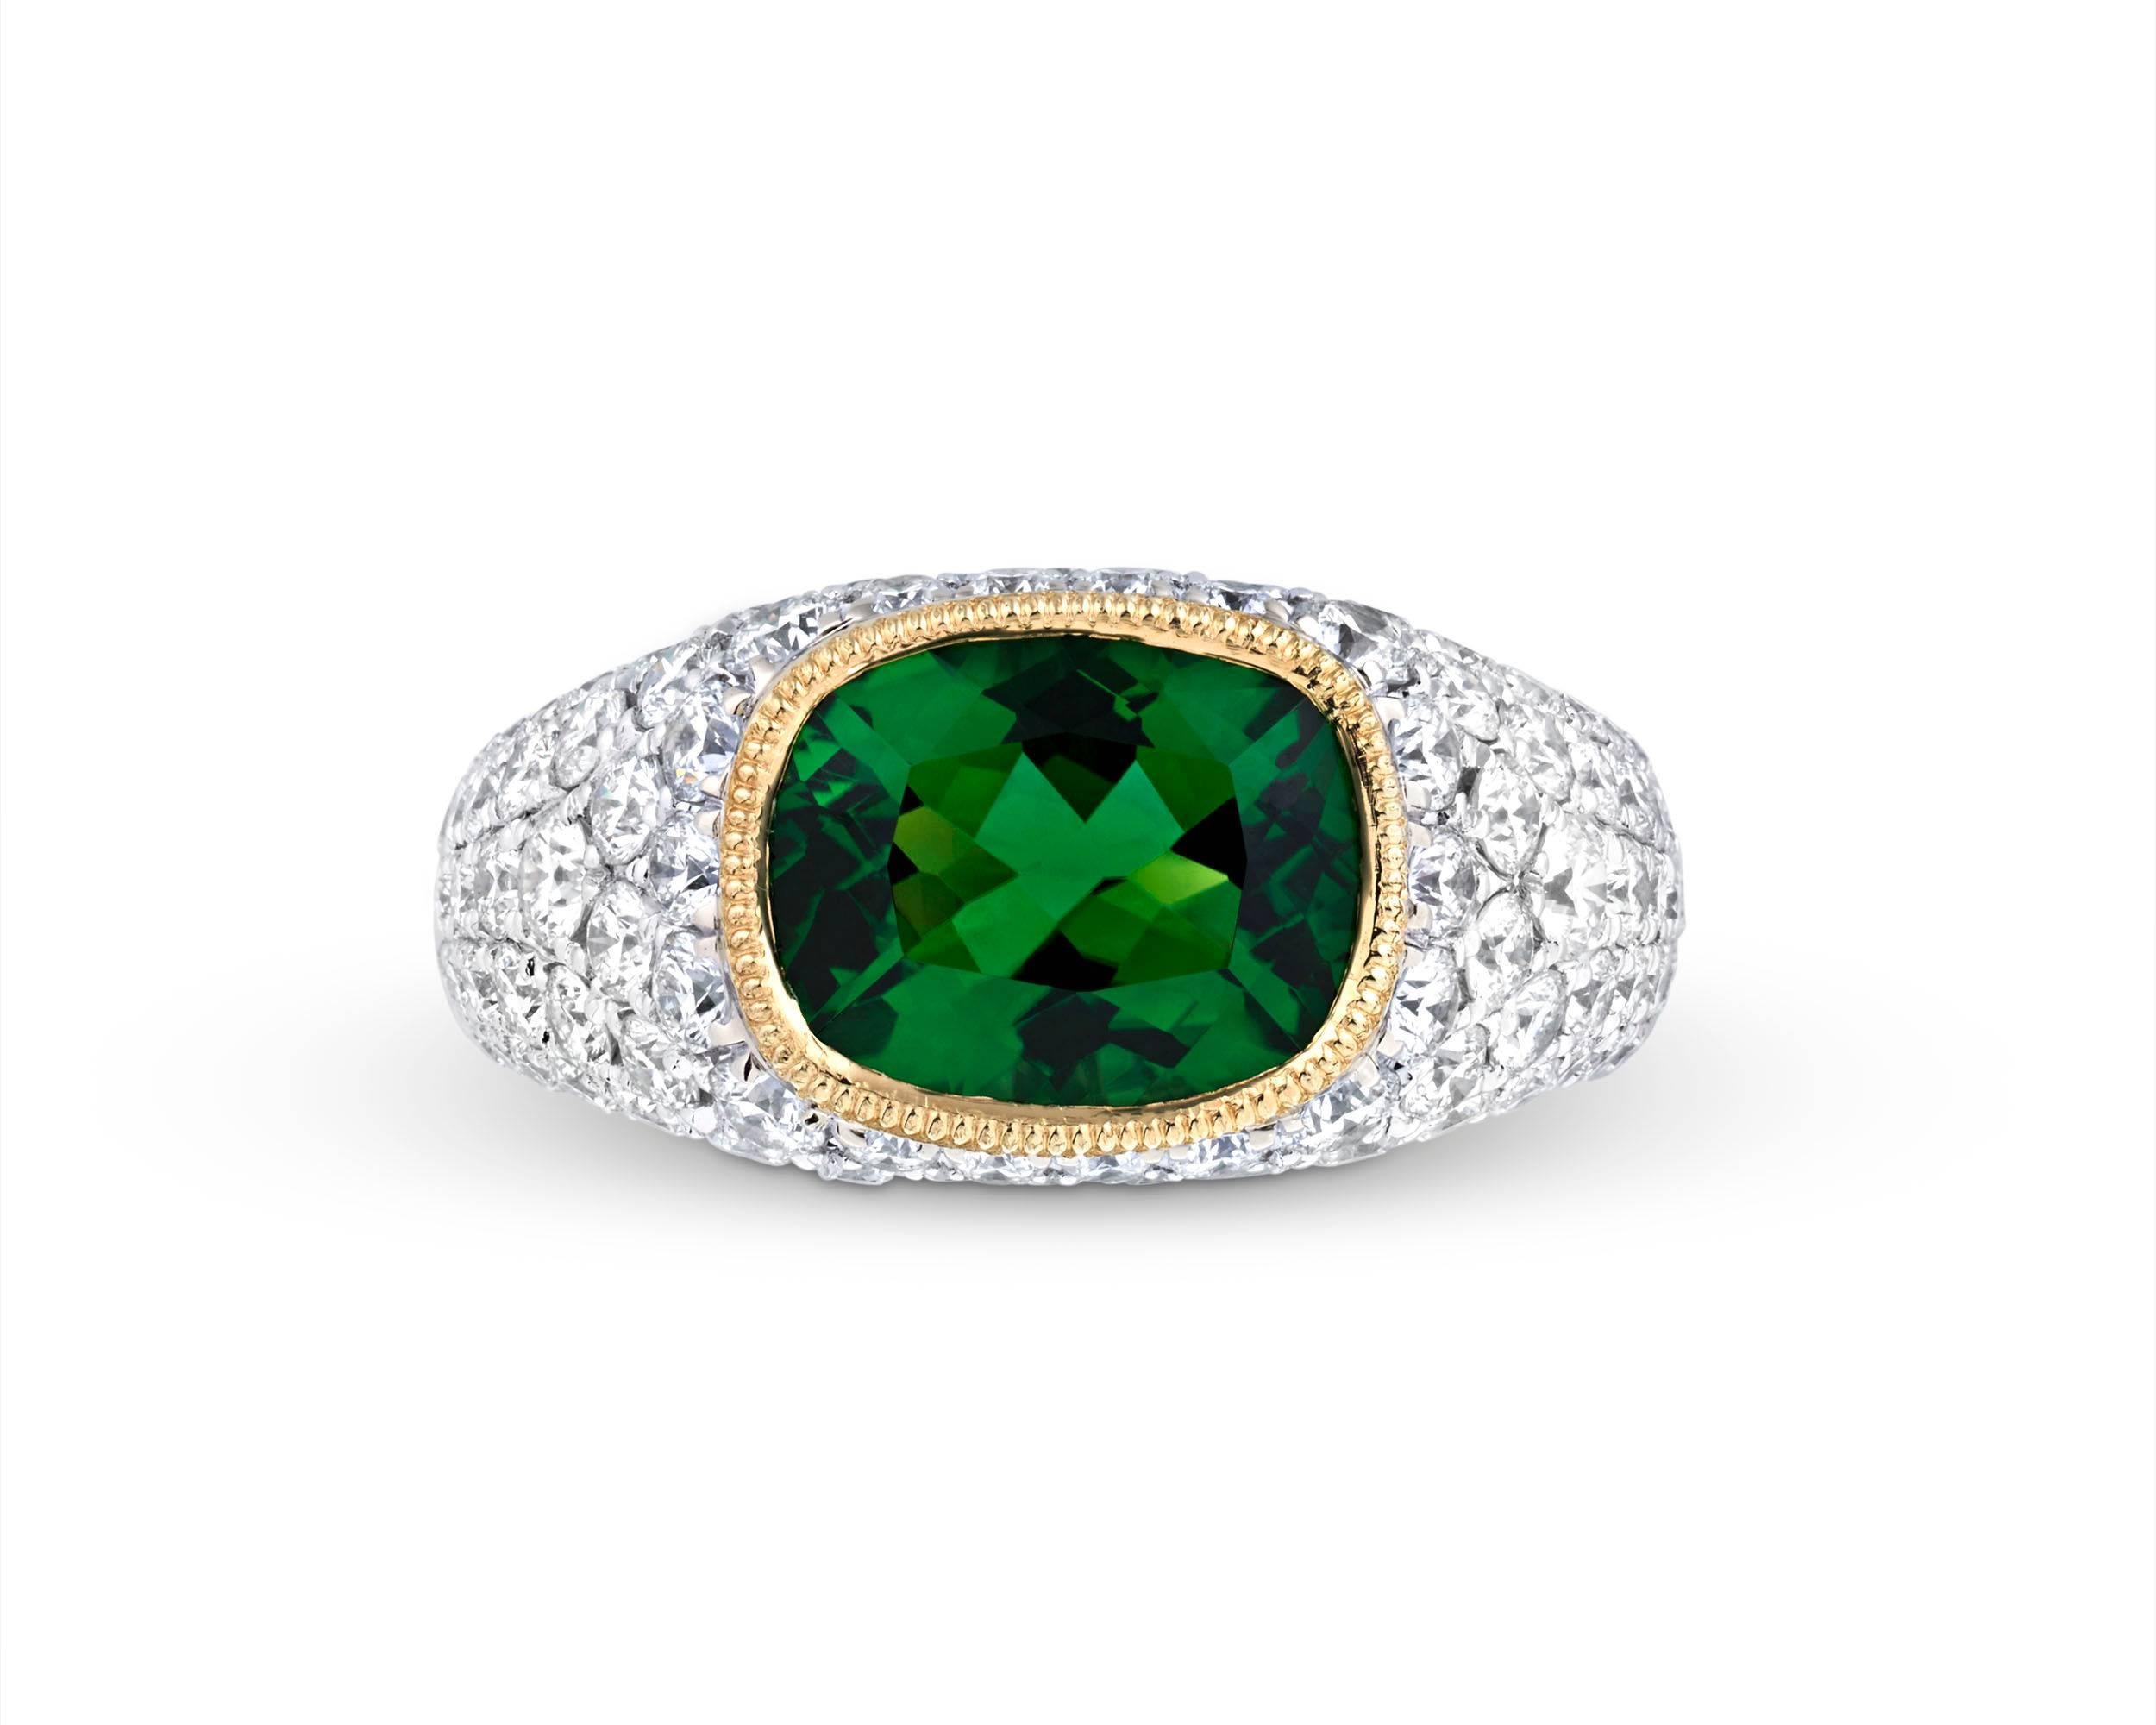 A rare 2.55-carat chrome tourmaline is on display in this breathtaking and bold ring. The extraordinary stone exhibits a refreshing and brilliant green hue that is far more dazzling than the typical green tourmaline. This is due to the stone's